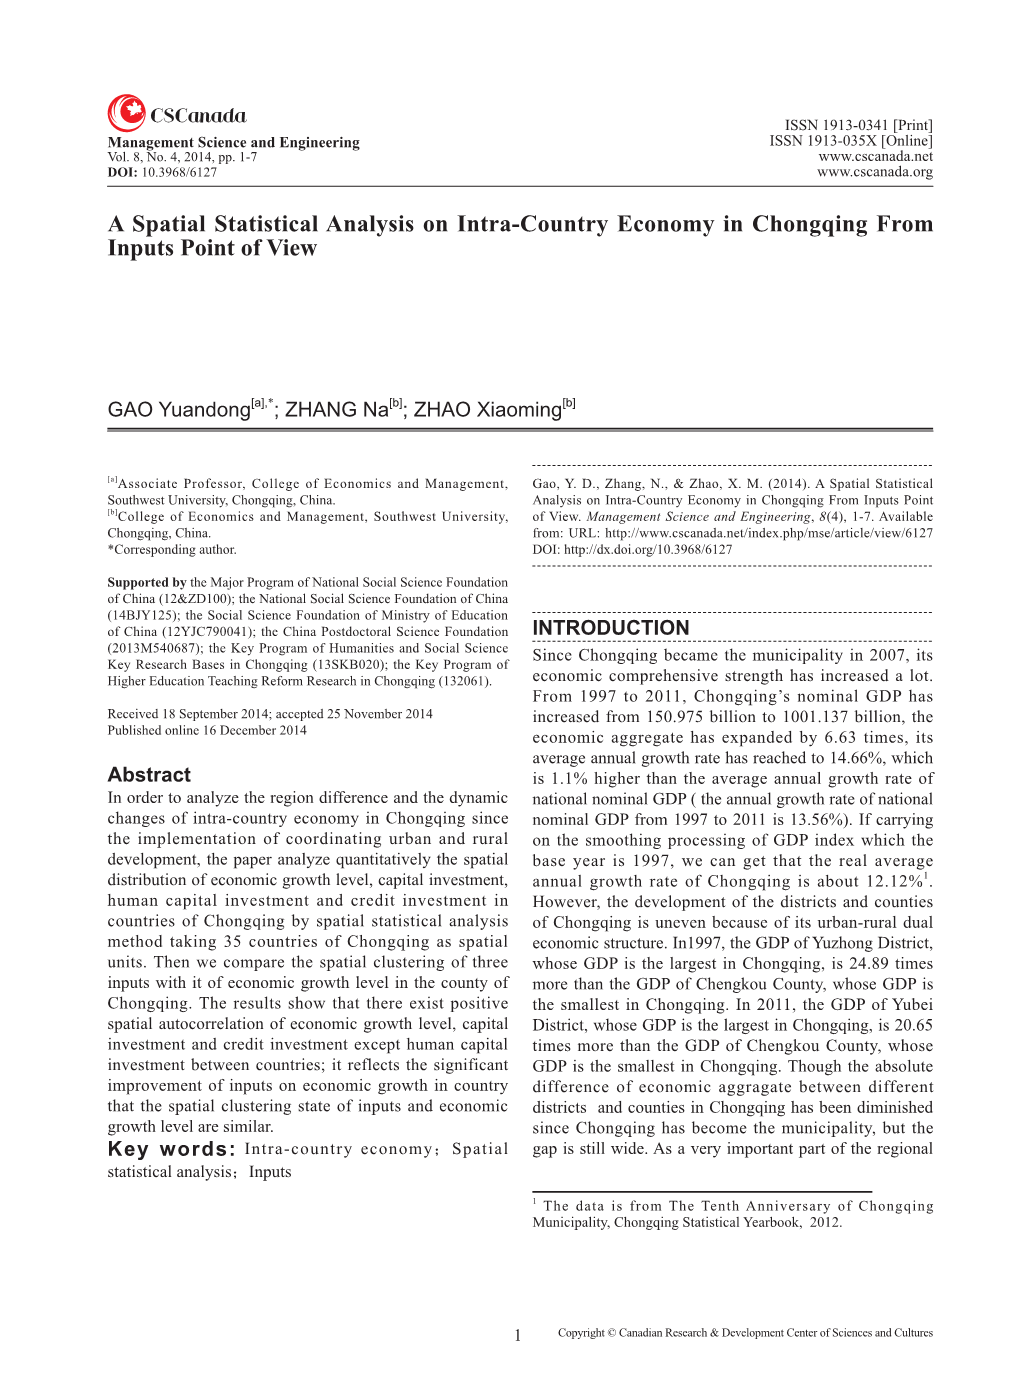 A Spatial Statistical Analysis on Intra-Country Economy in Chongqing from Inputs Point of View